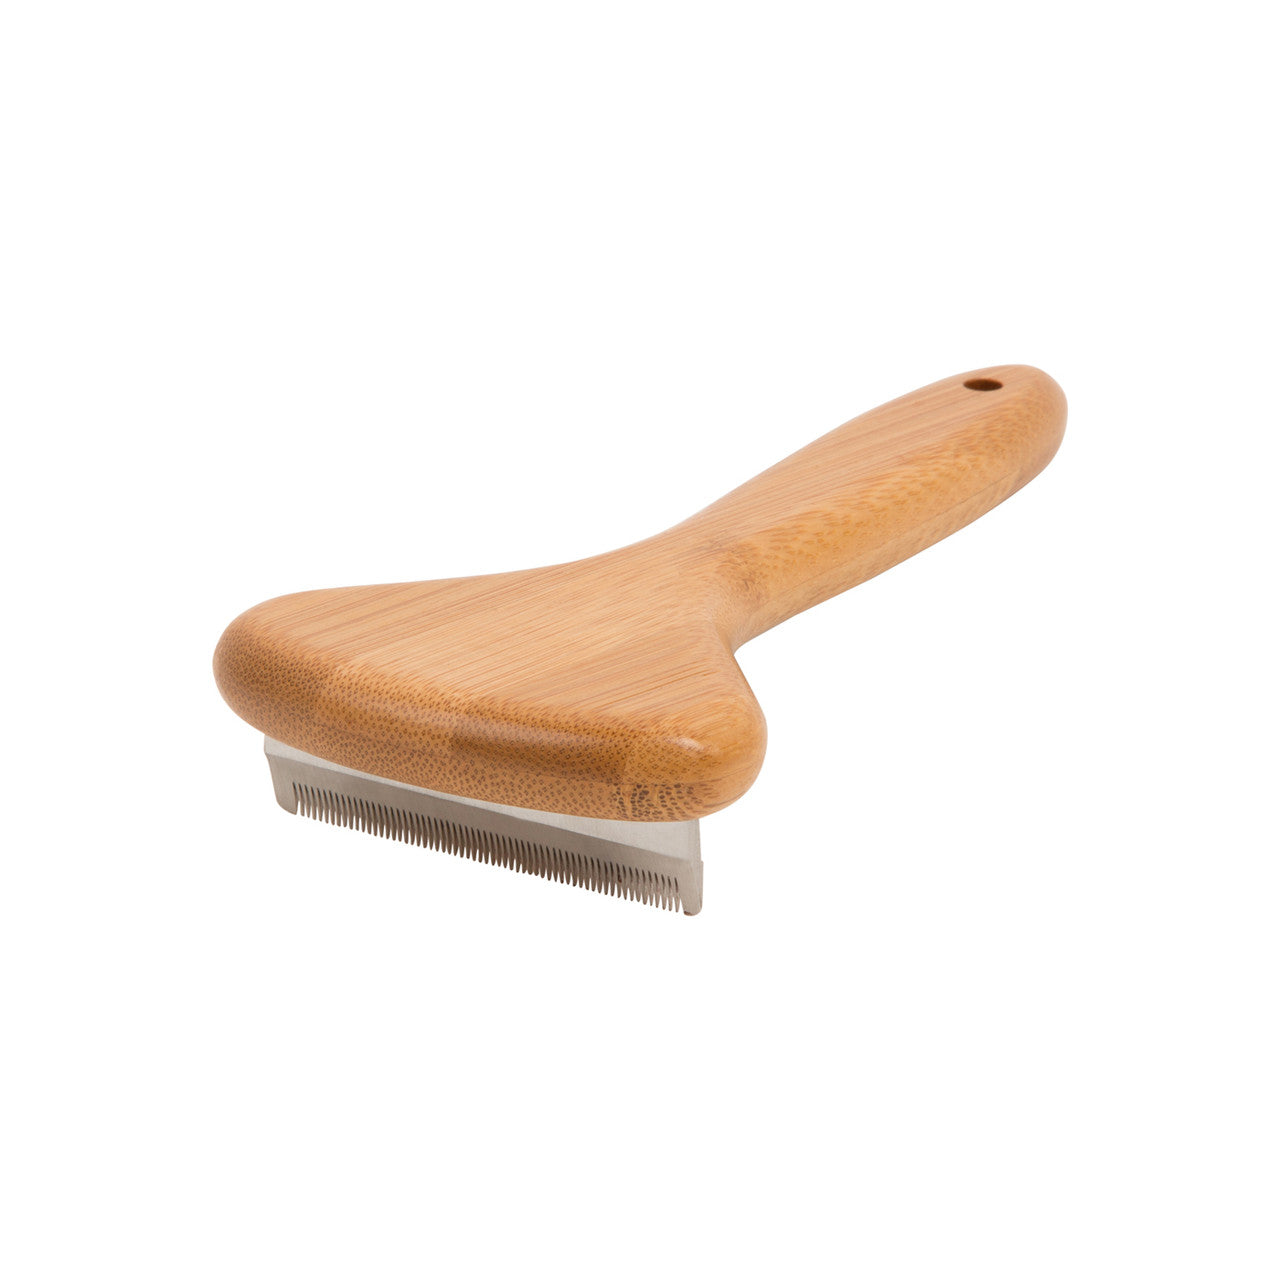 Natural bamboo deshedding brush facing down with metal comb close up on white background